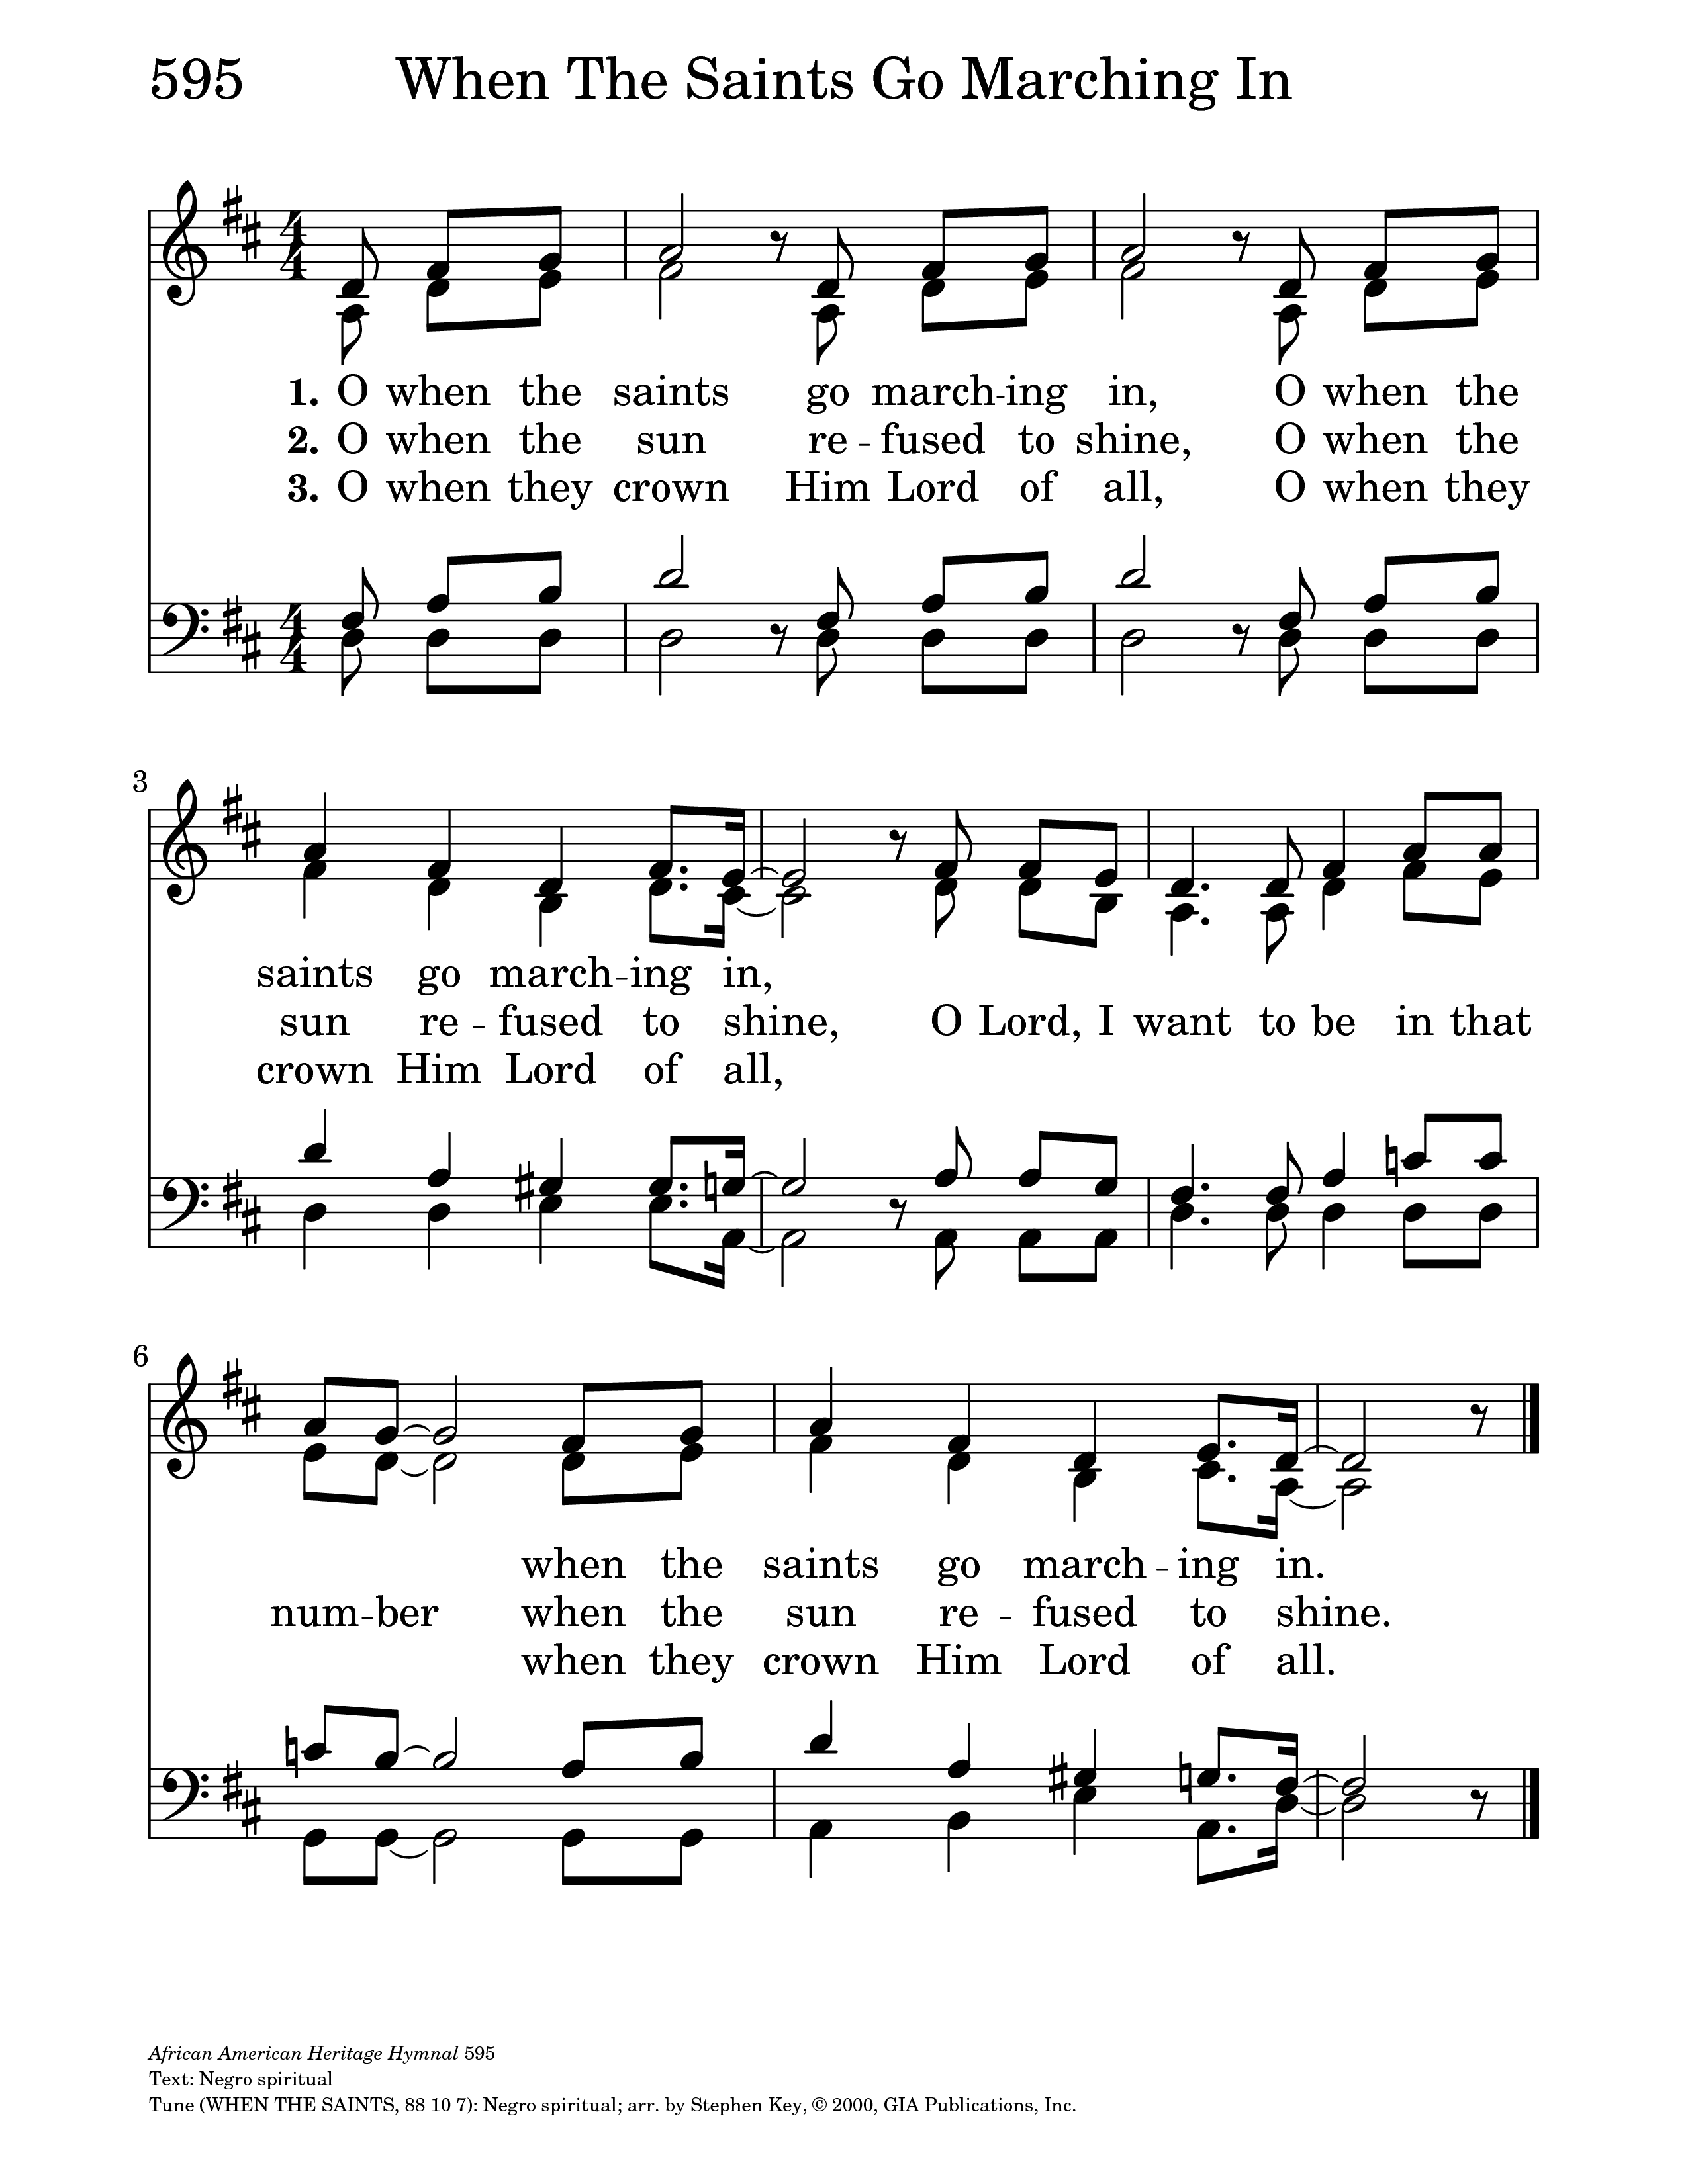 O when the saints go marching in] | Hymnary.org